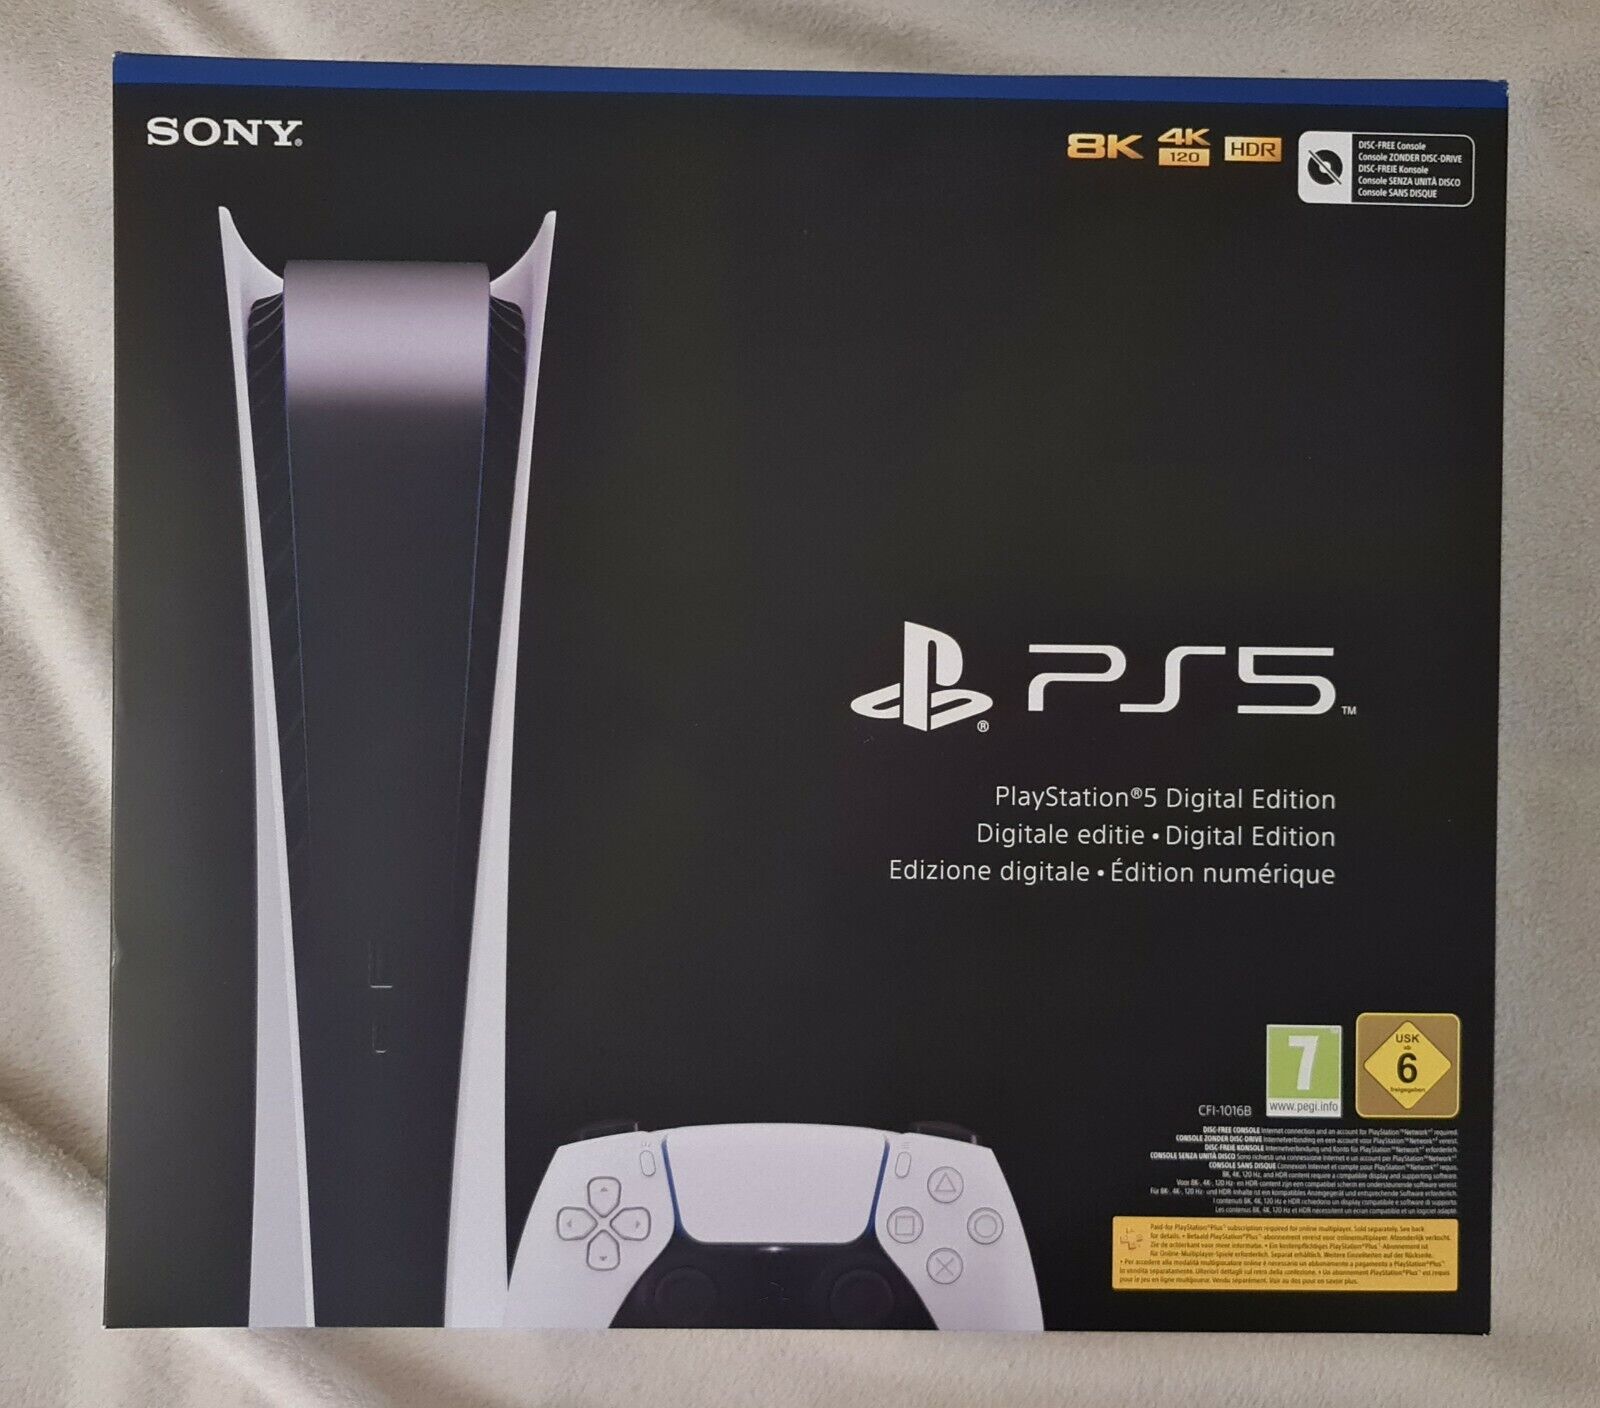 PS5: the console at a discount of 1 euro for those who pass the Sony test